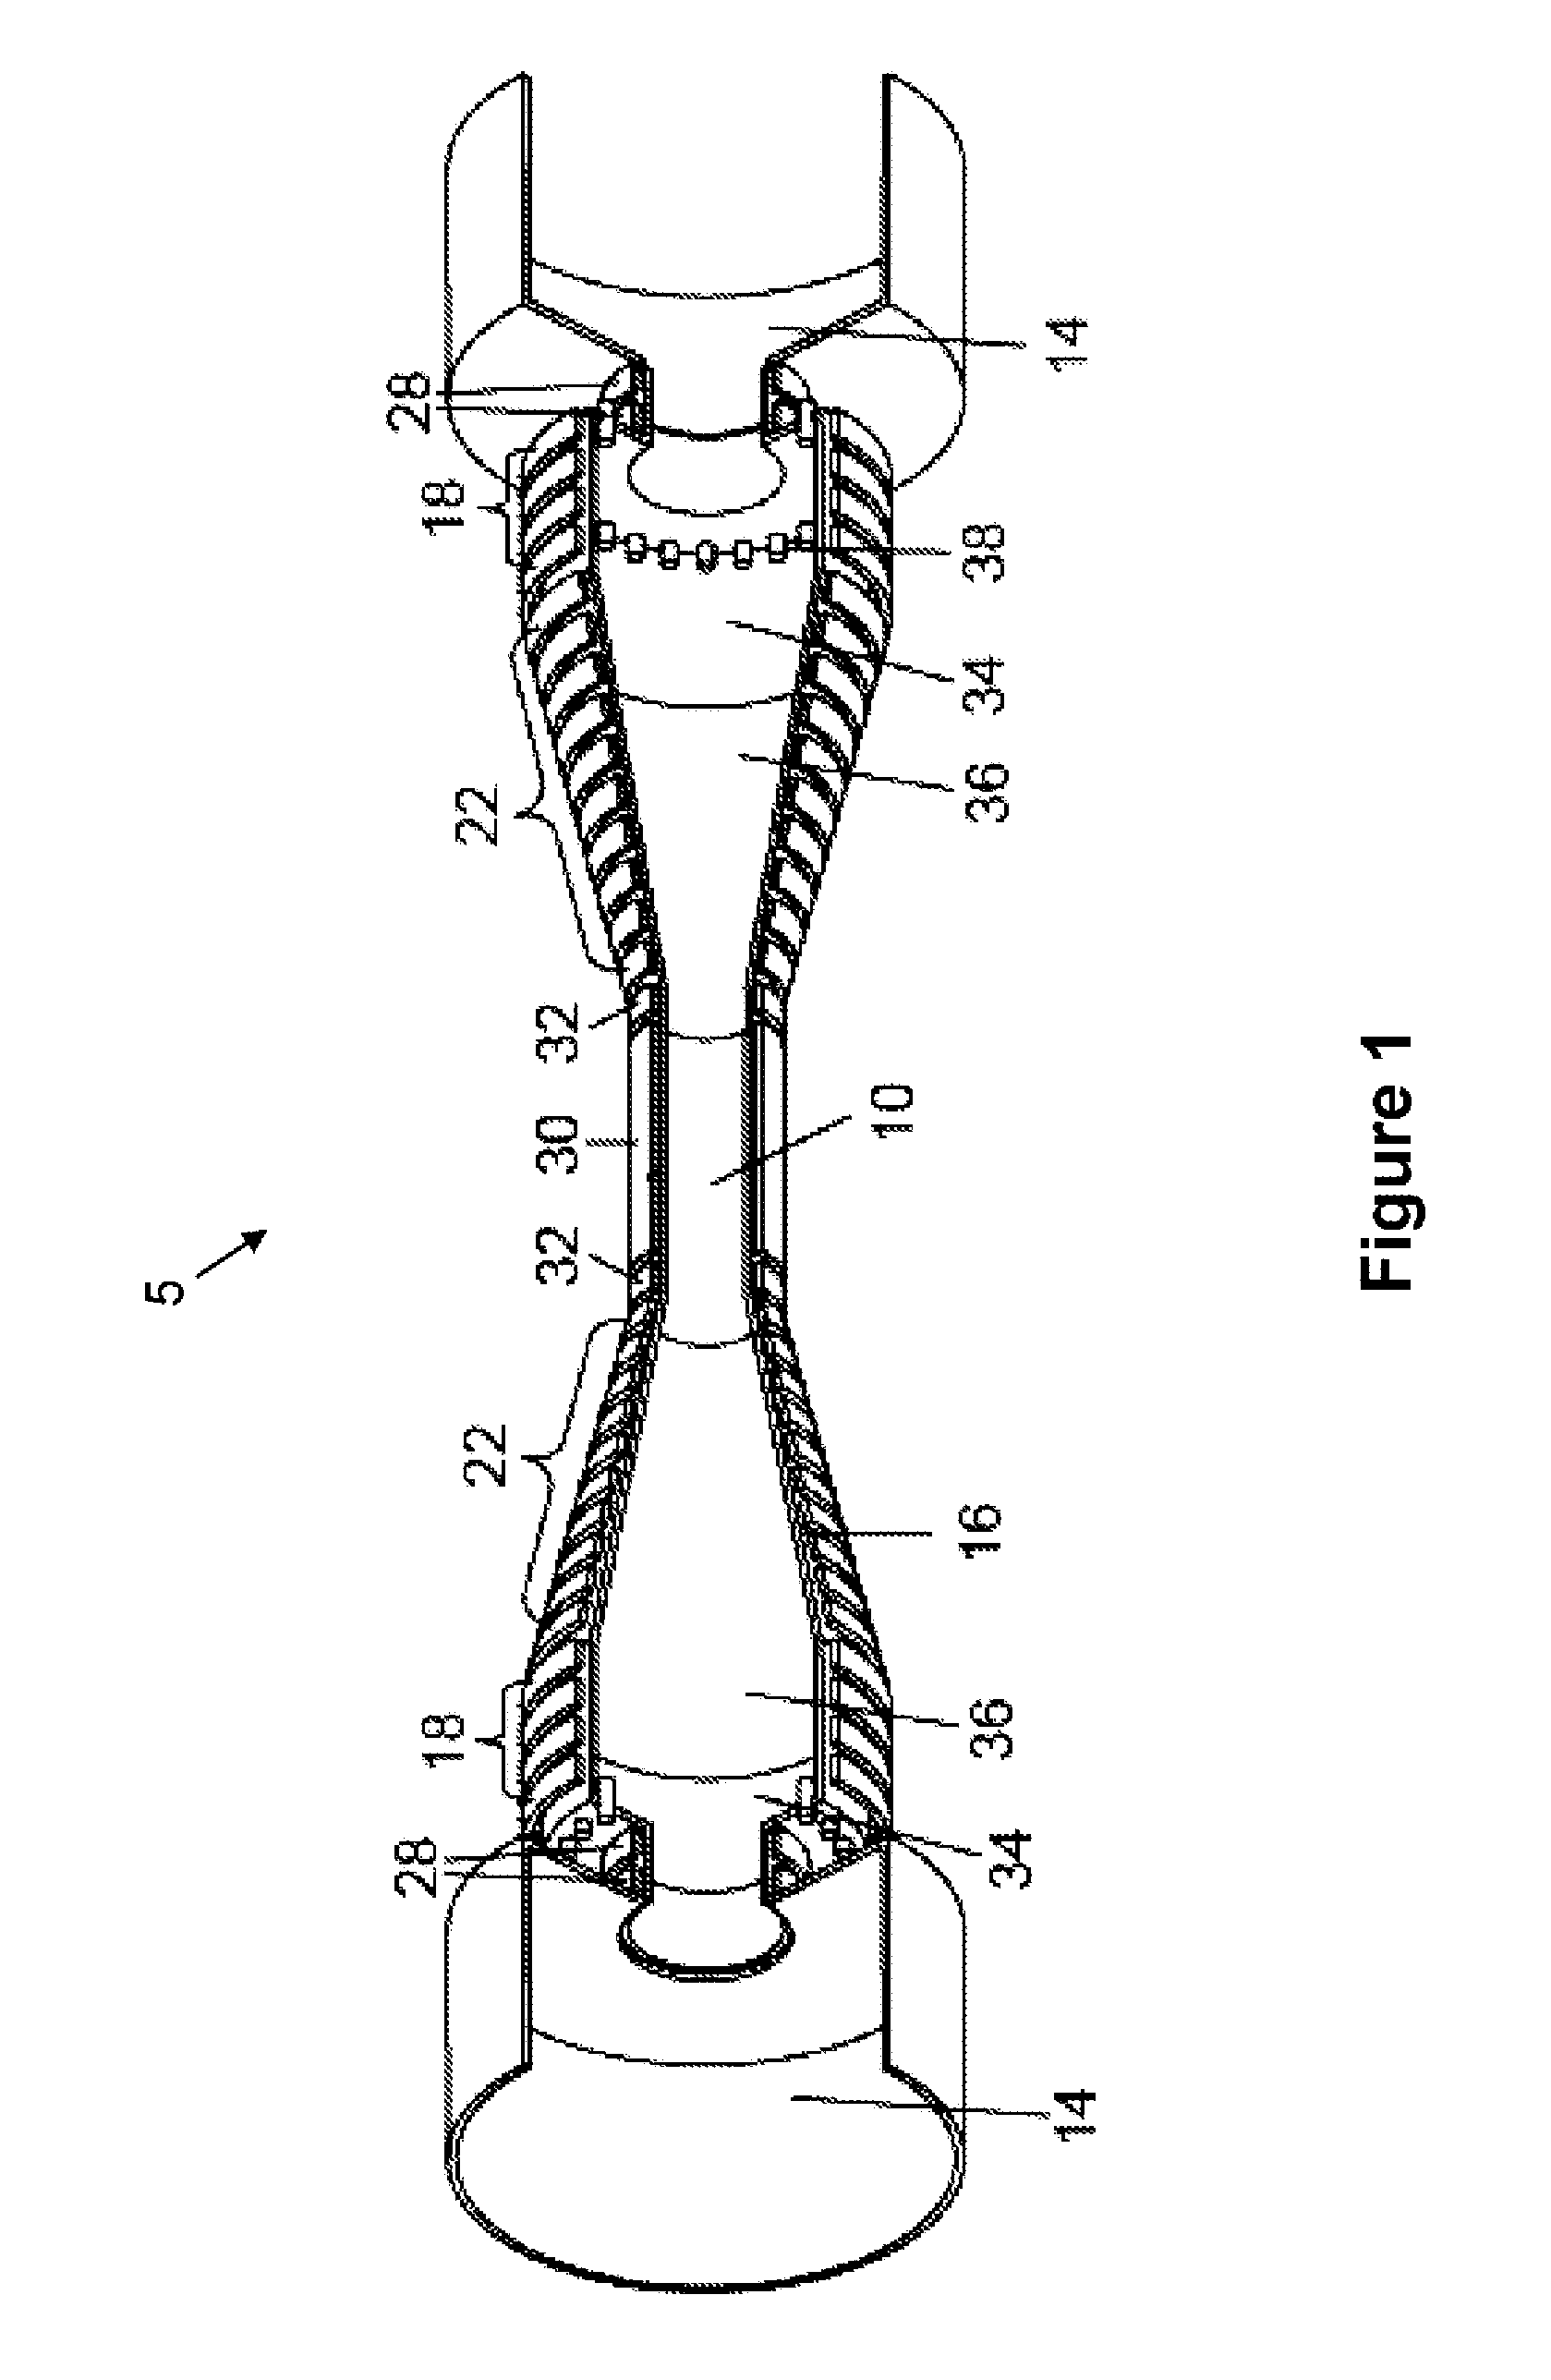 Method and apparatus for the generation, heating and/or compression of plasmoids and/or recovery of energy therefrom